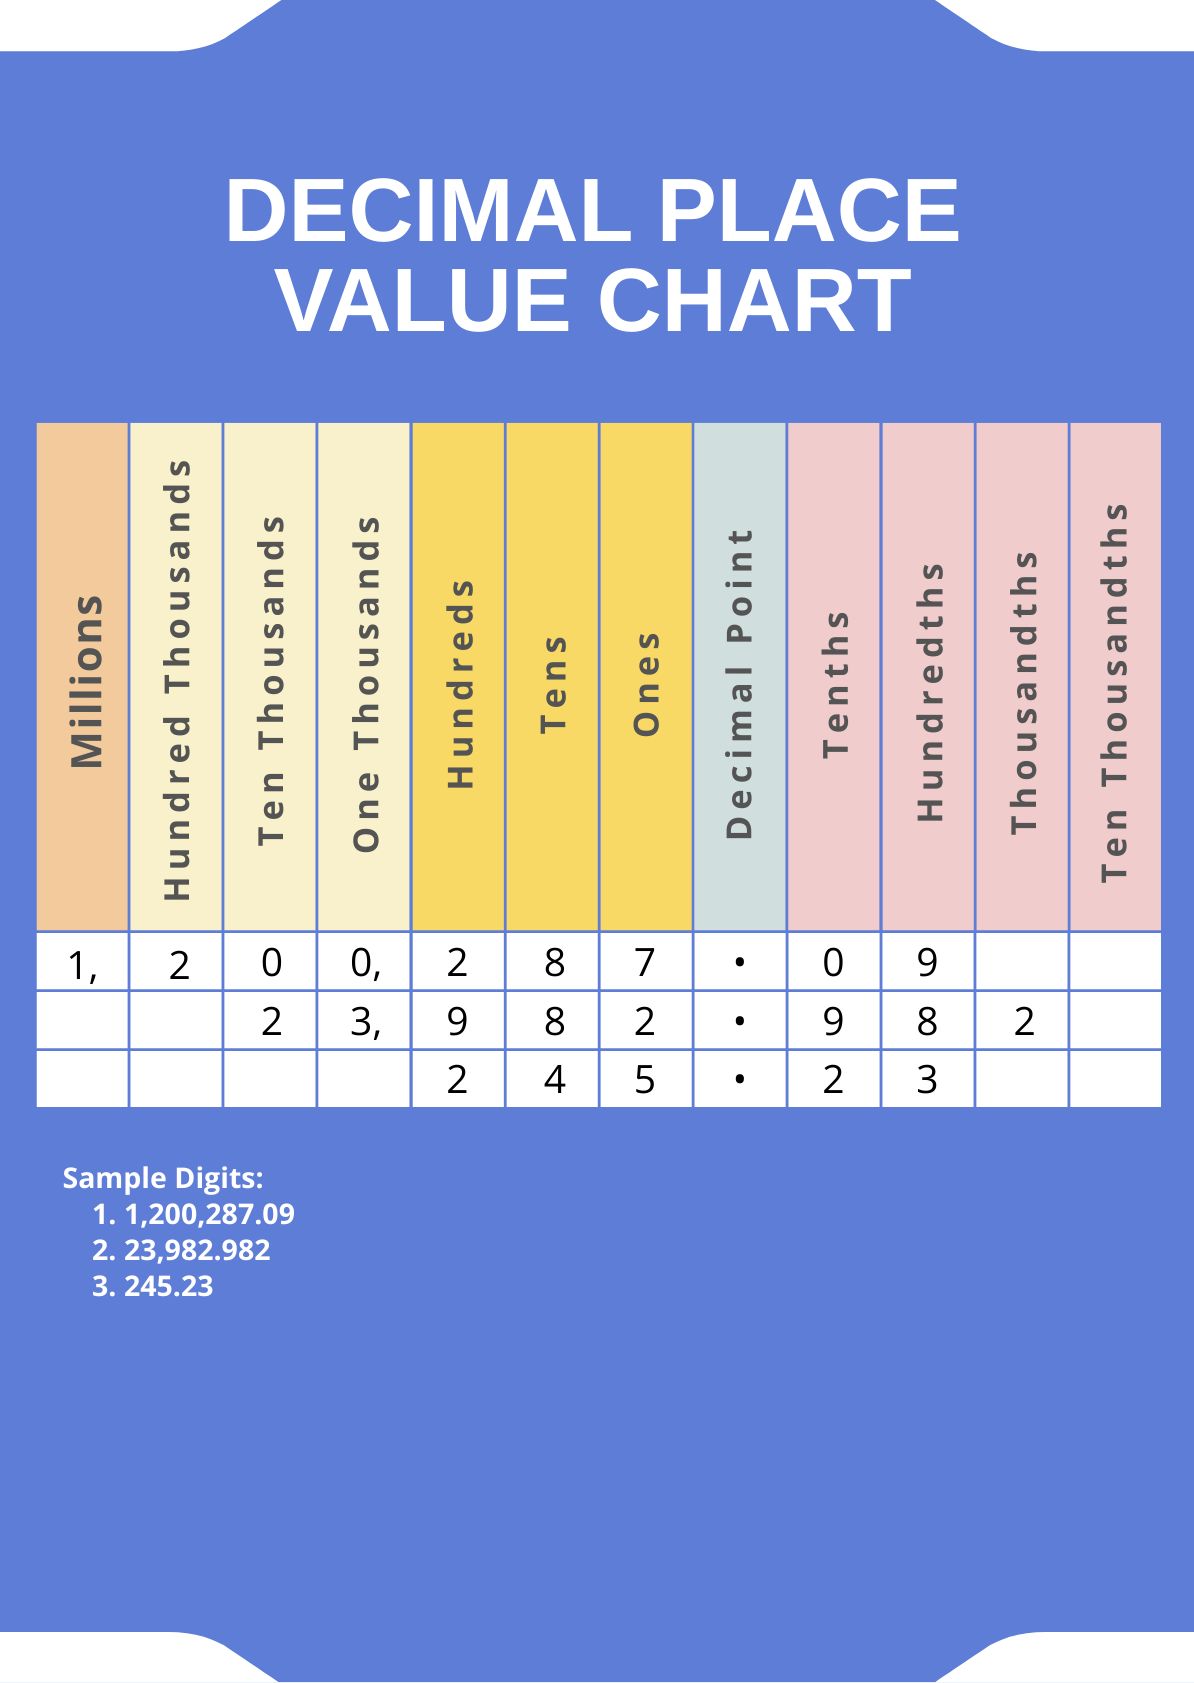 Virtual Decimal Place Value Chart in PDF